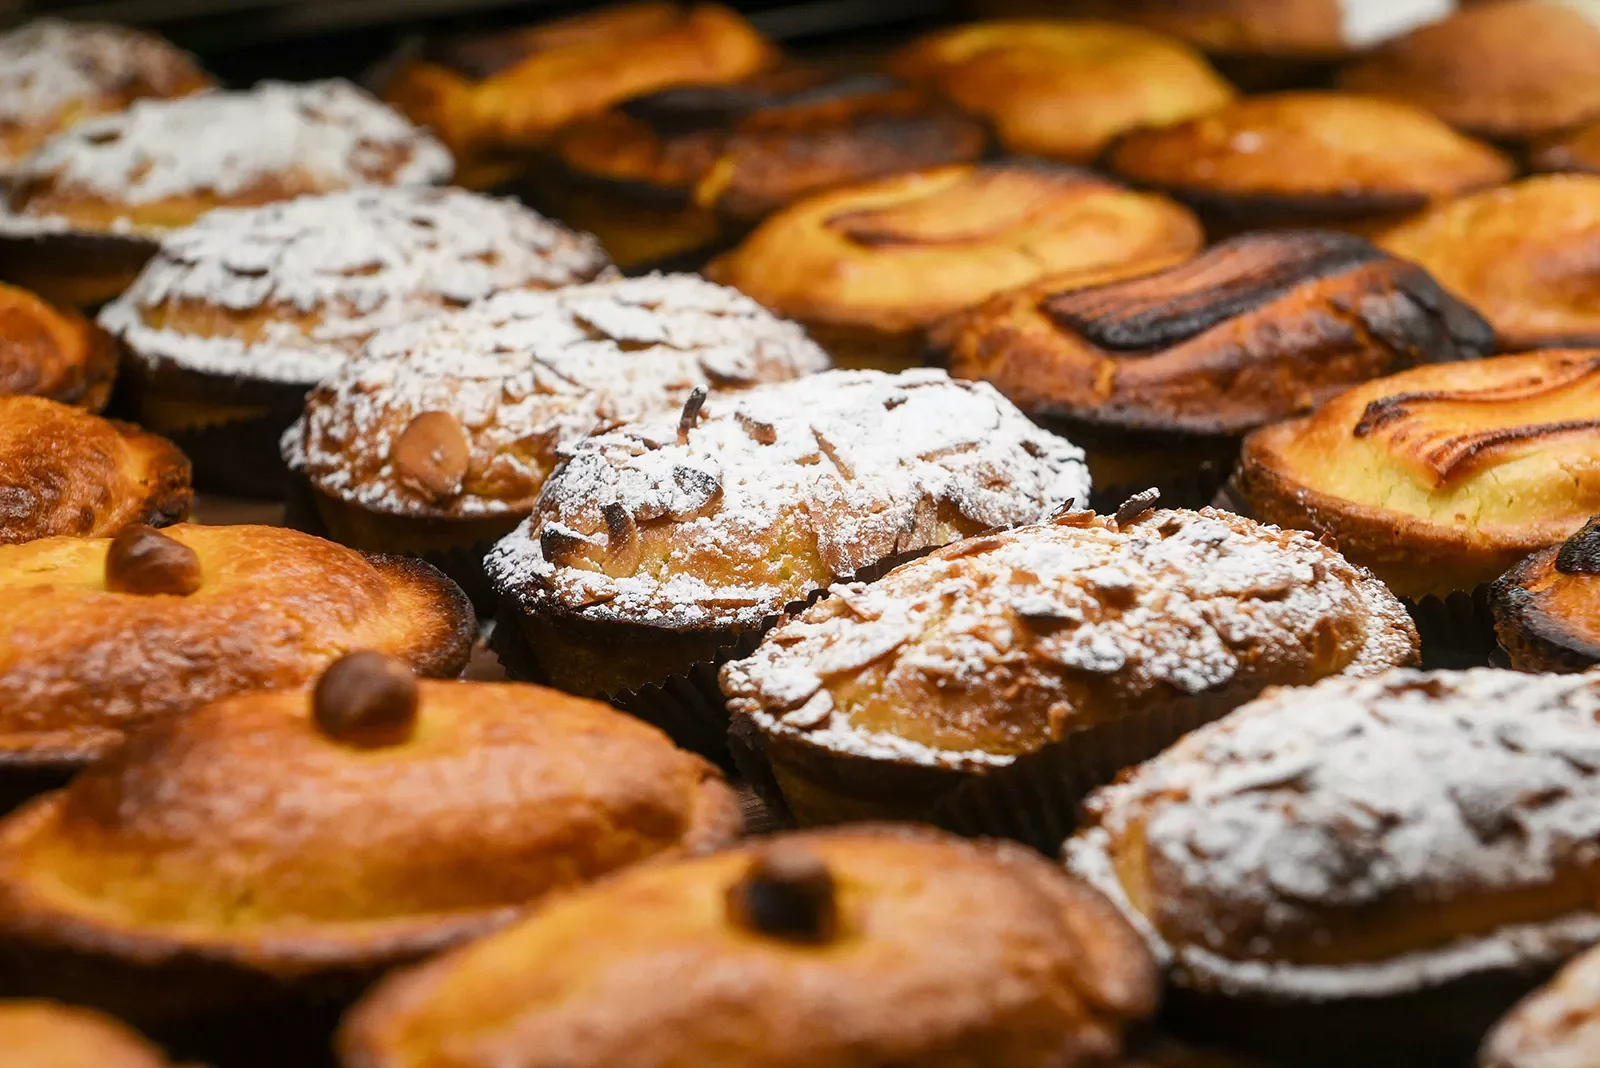 Pastries lined up covered with powdered sugar